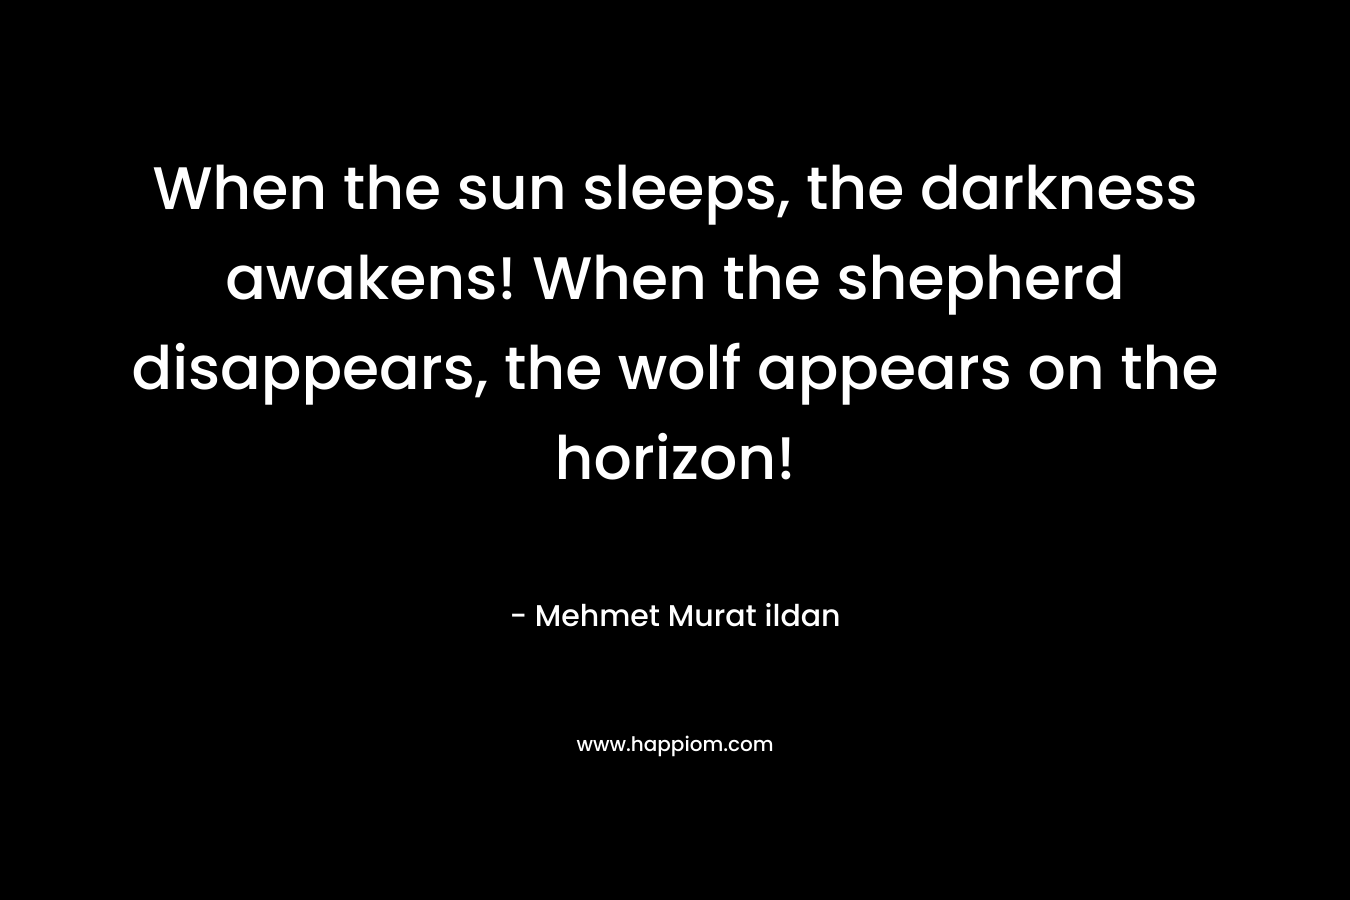 When the sun sleeps, the darkness awakens! When the shepherd disappears, the wolf appears on the horizon!